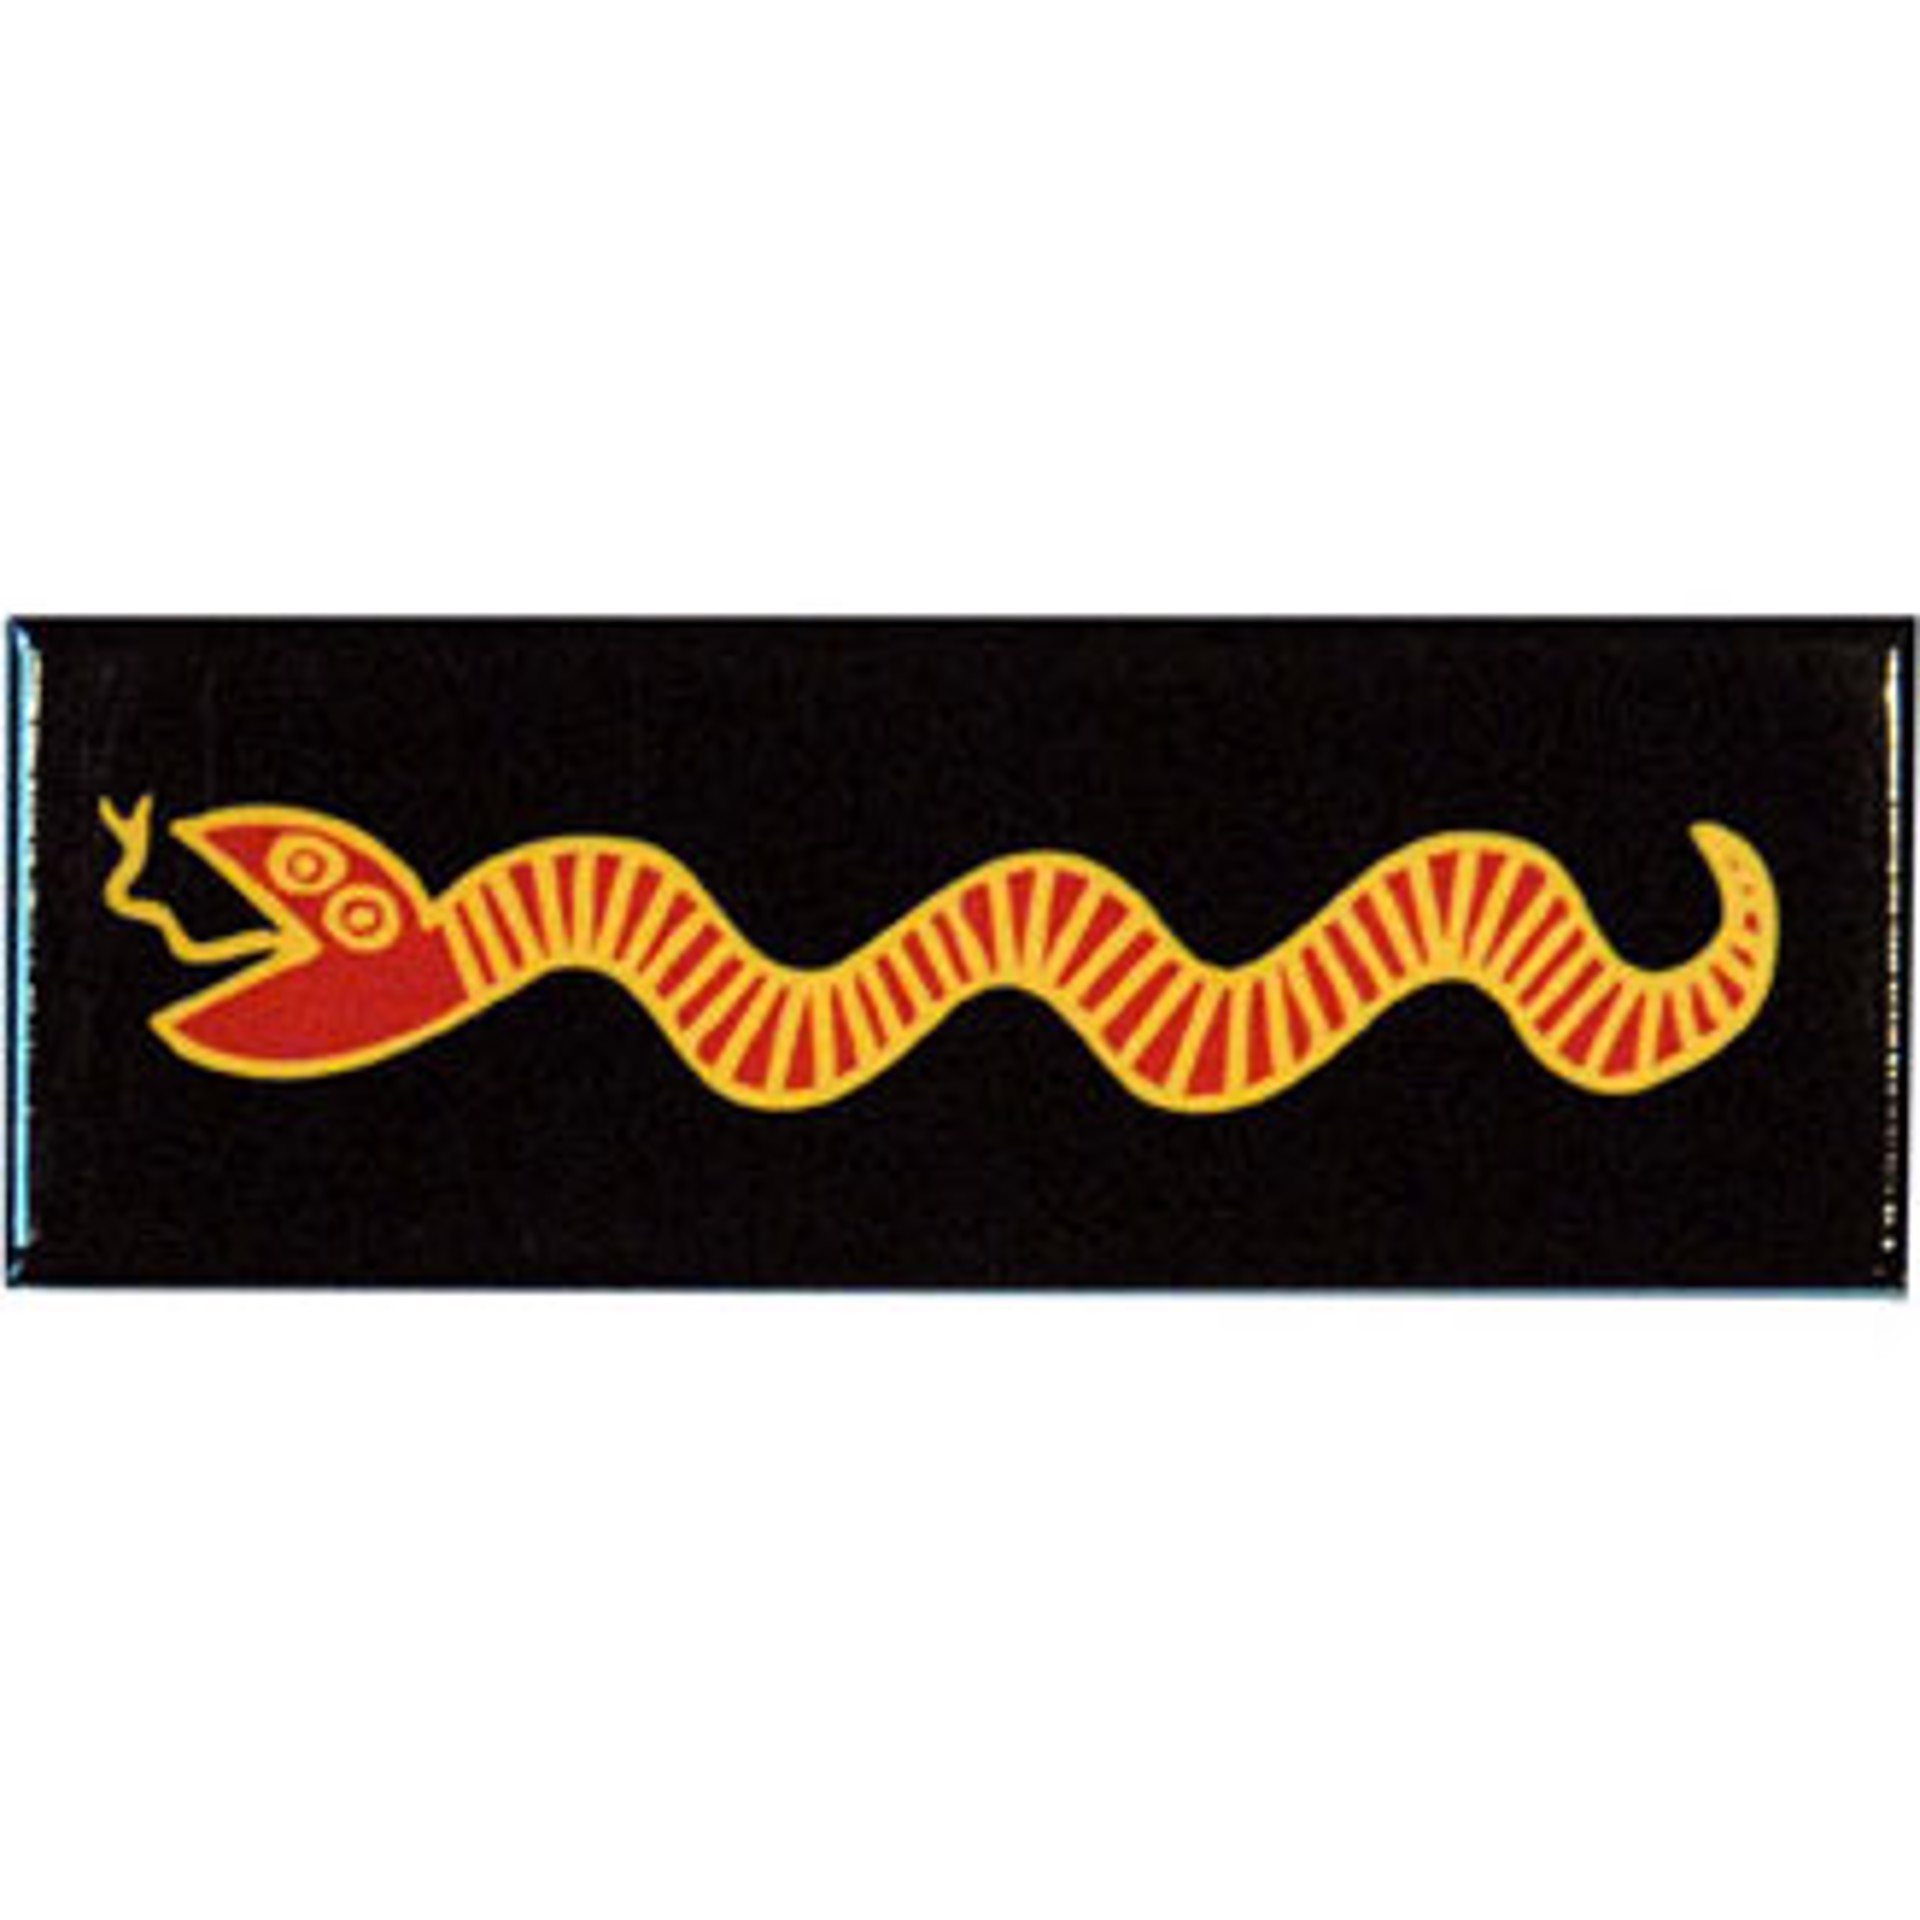 Snake 4.5x1.5 Magnet by Keith Haring